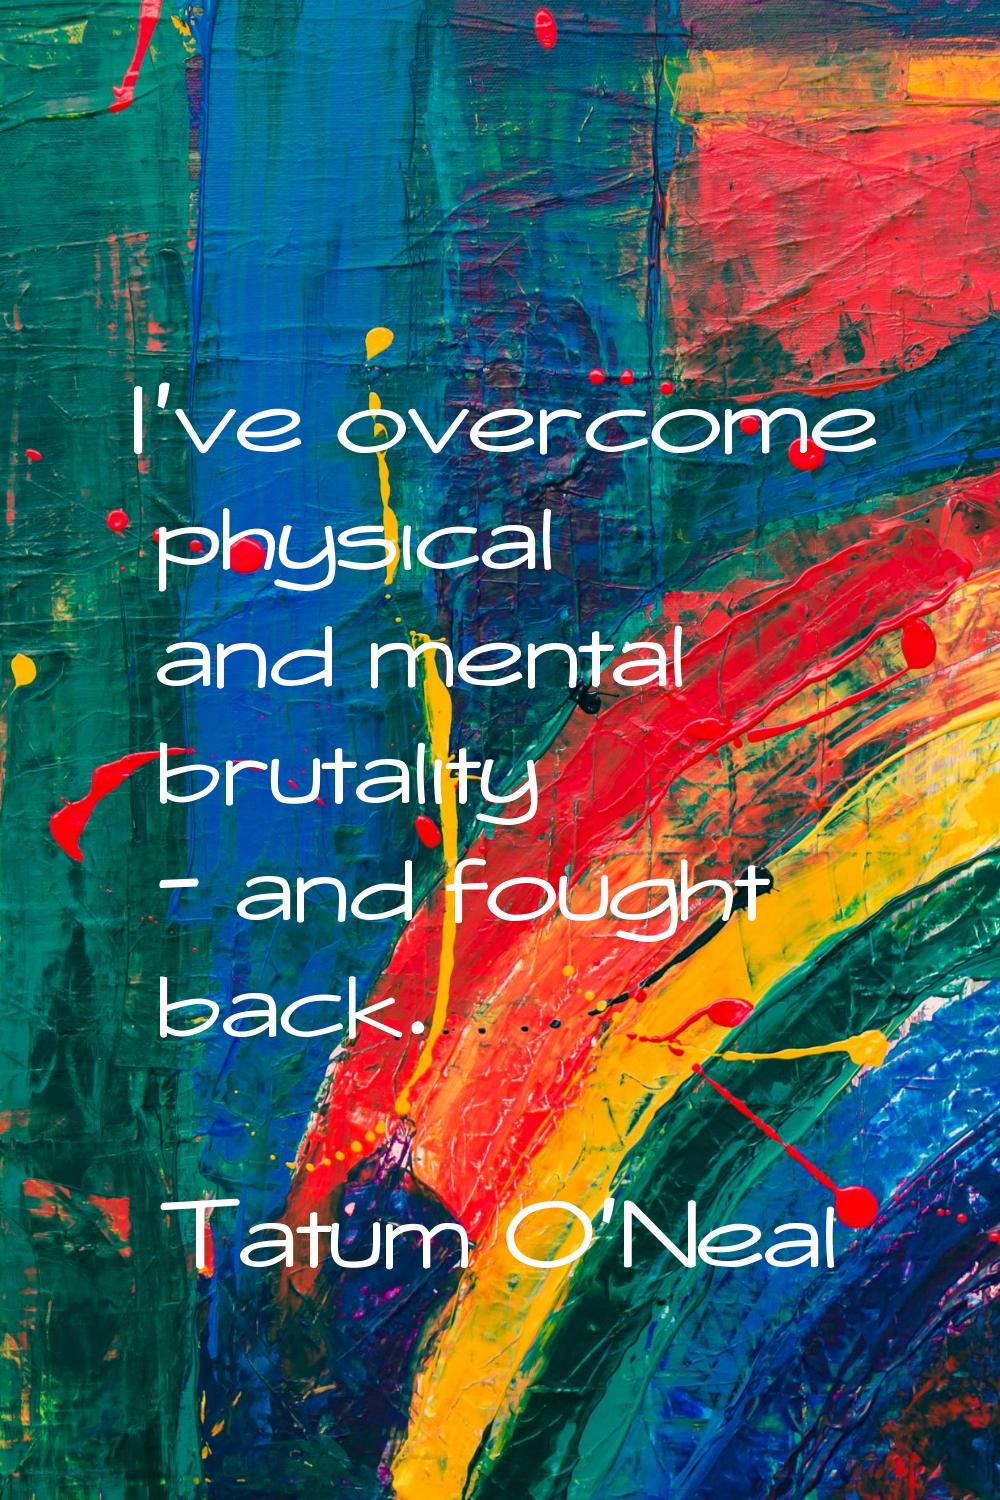 I've overcome physical and mental brutality - and fought back.